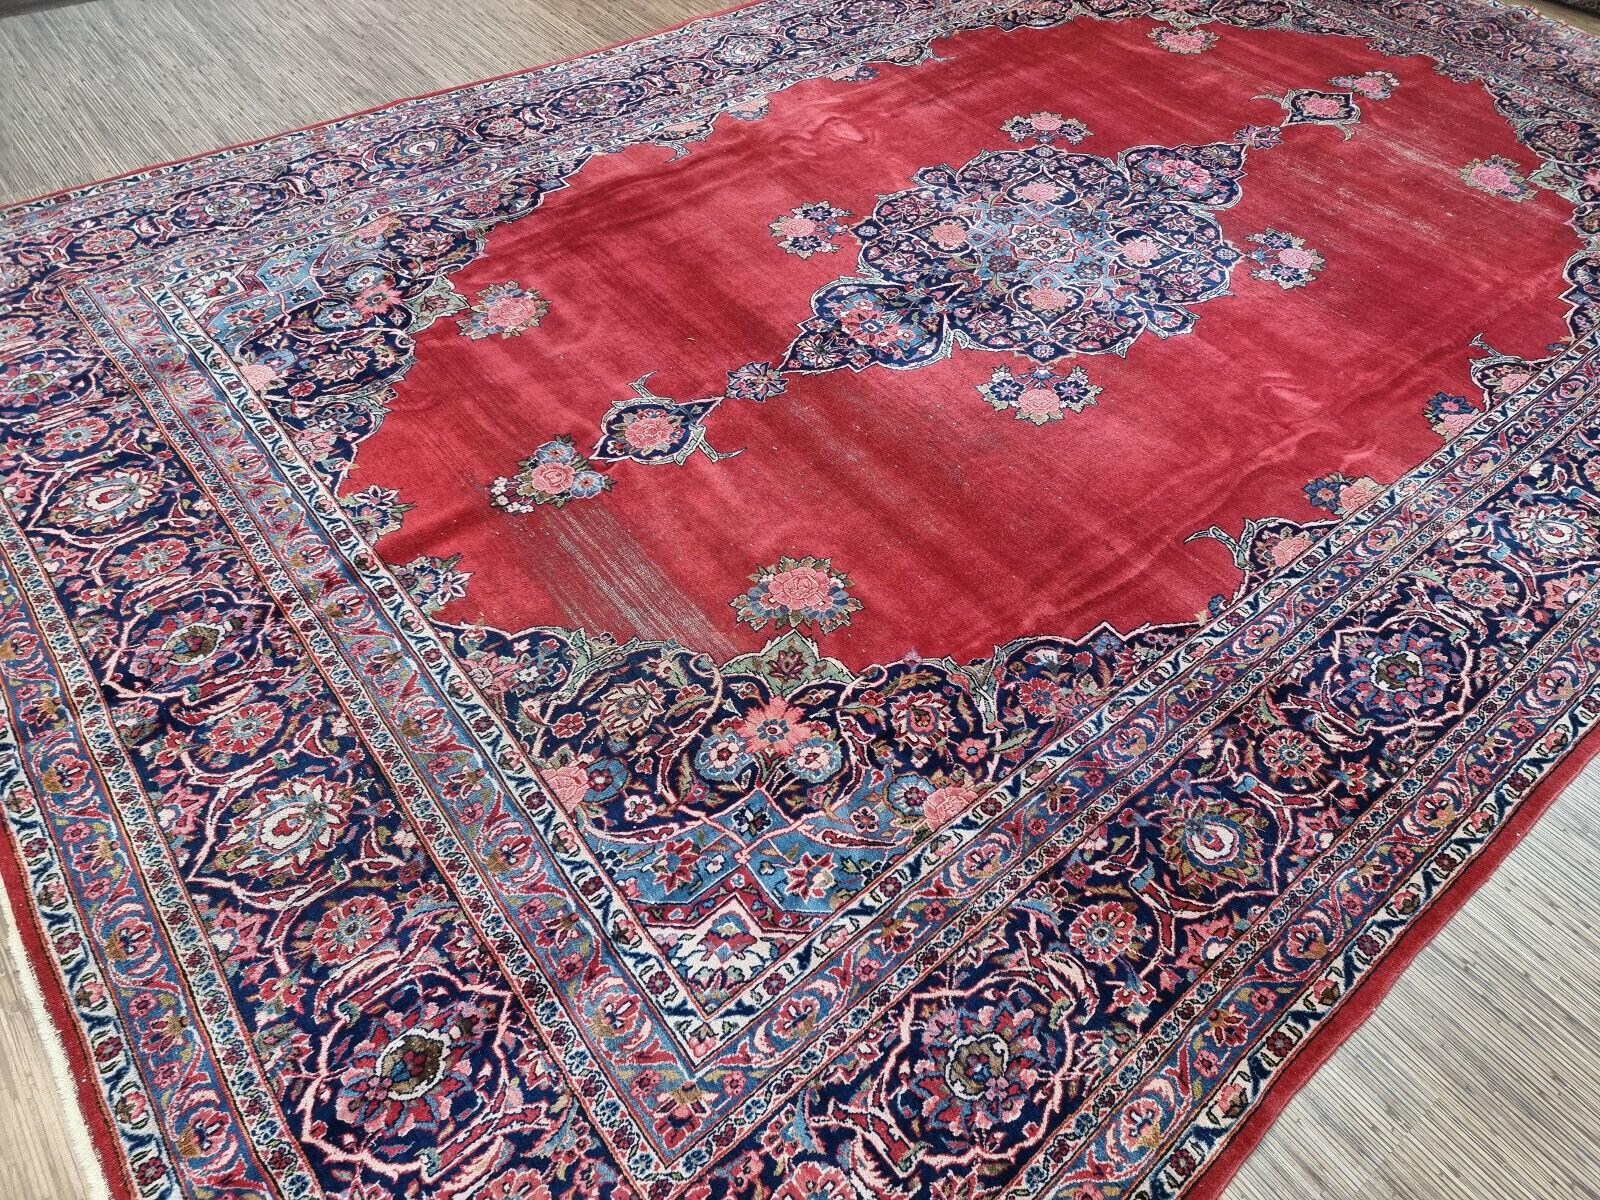 Early 20th Century Handmade Antique Persian Style Kashan Distressed Rug 8.5' x 12.9', 1920s - 1D68 For Sale